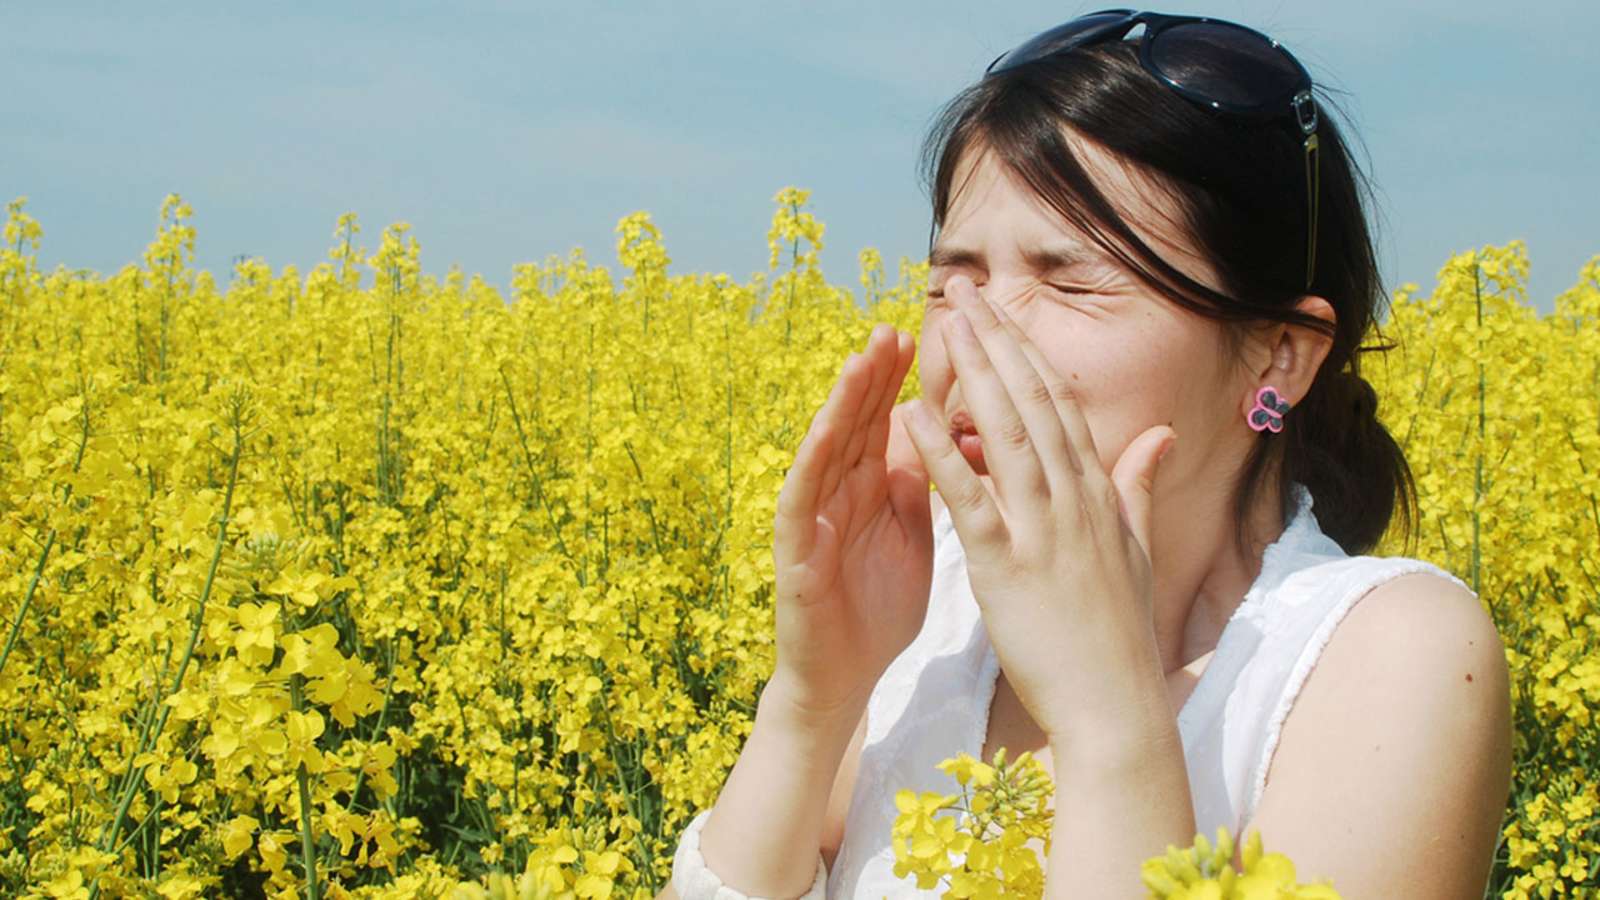 How to cope with allergy season